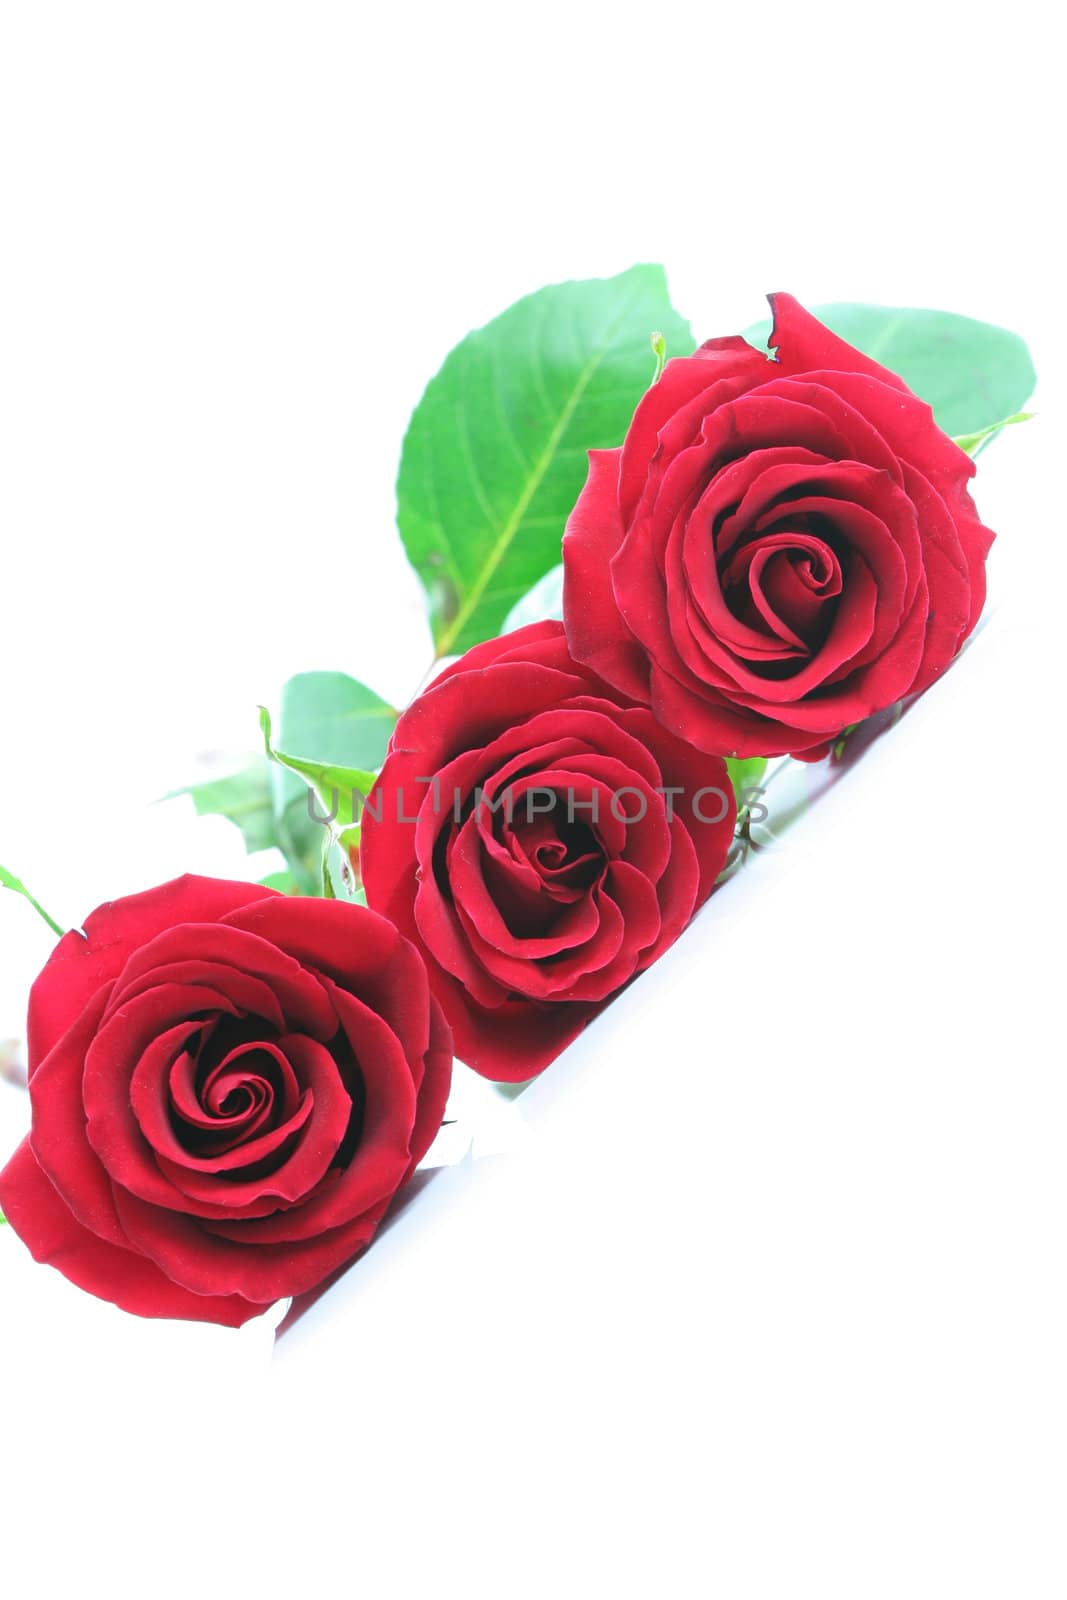 Three red roses isolated on white. Angled by jarenwicklund